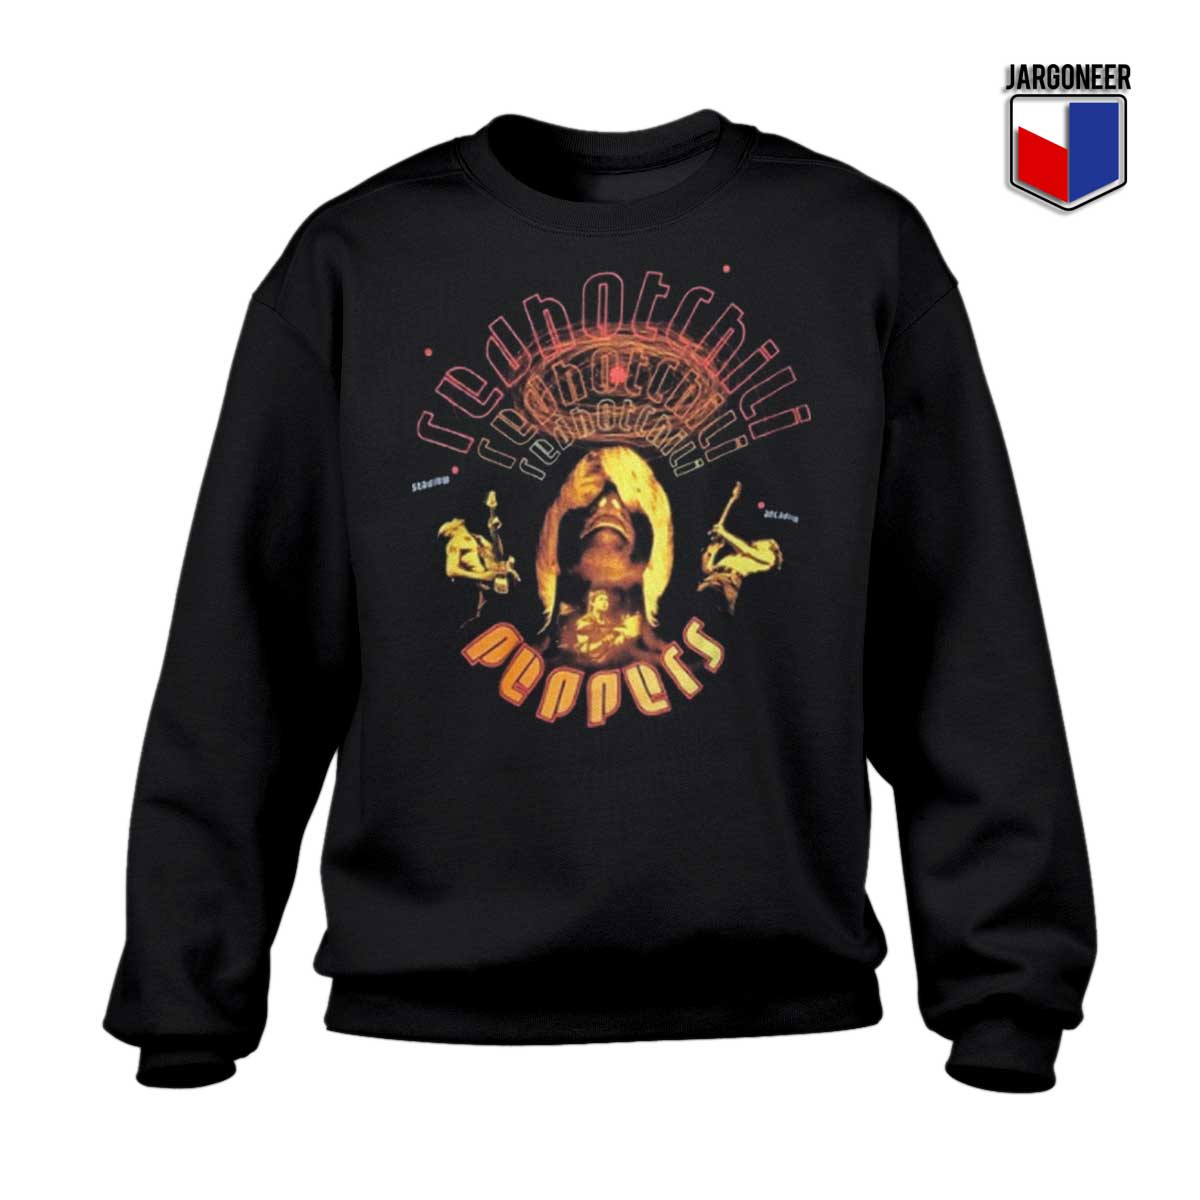 Red Hot Chili Peppers Sweatshirt - Shop Unique Graphic Cool Shirt Designs